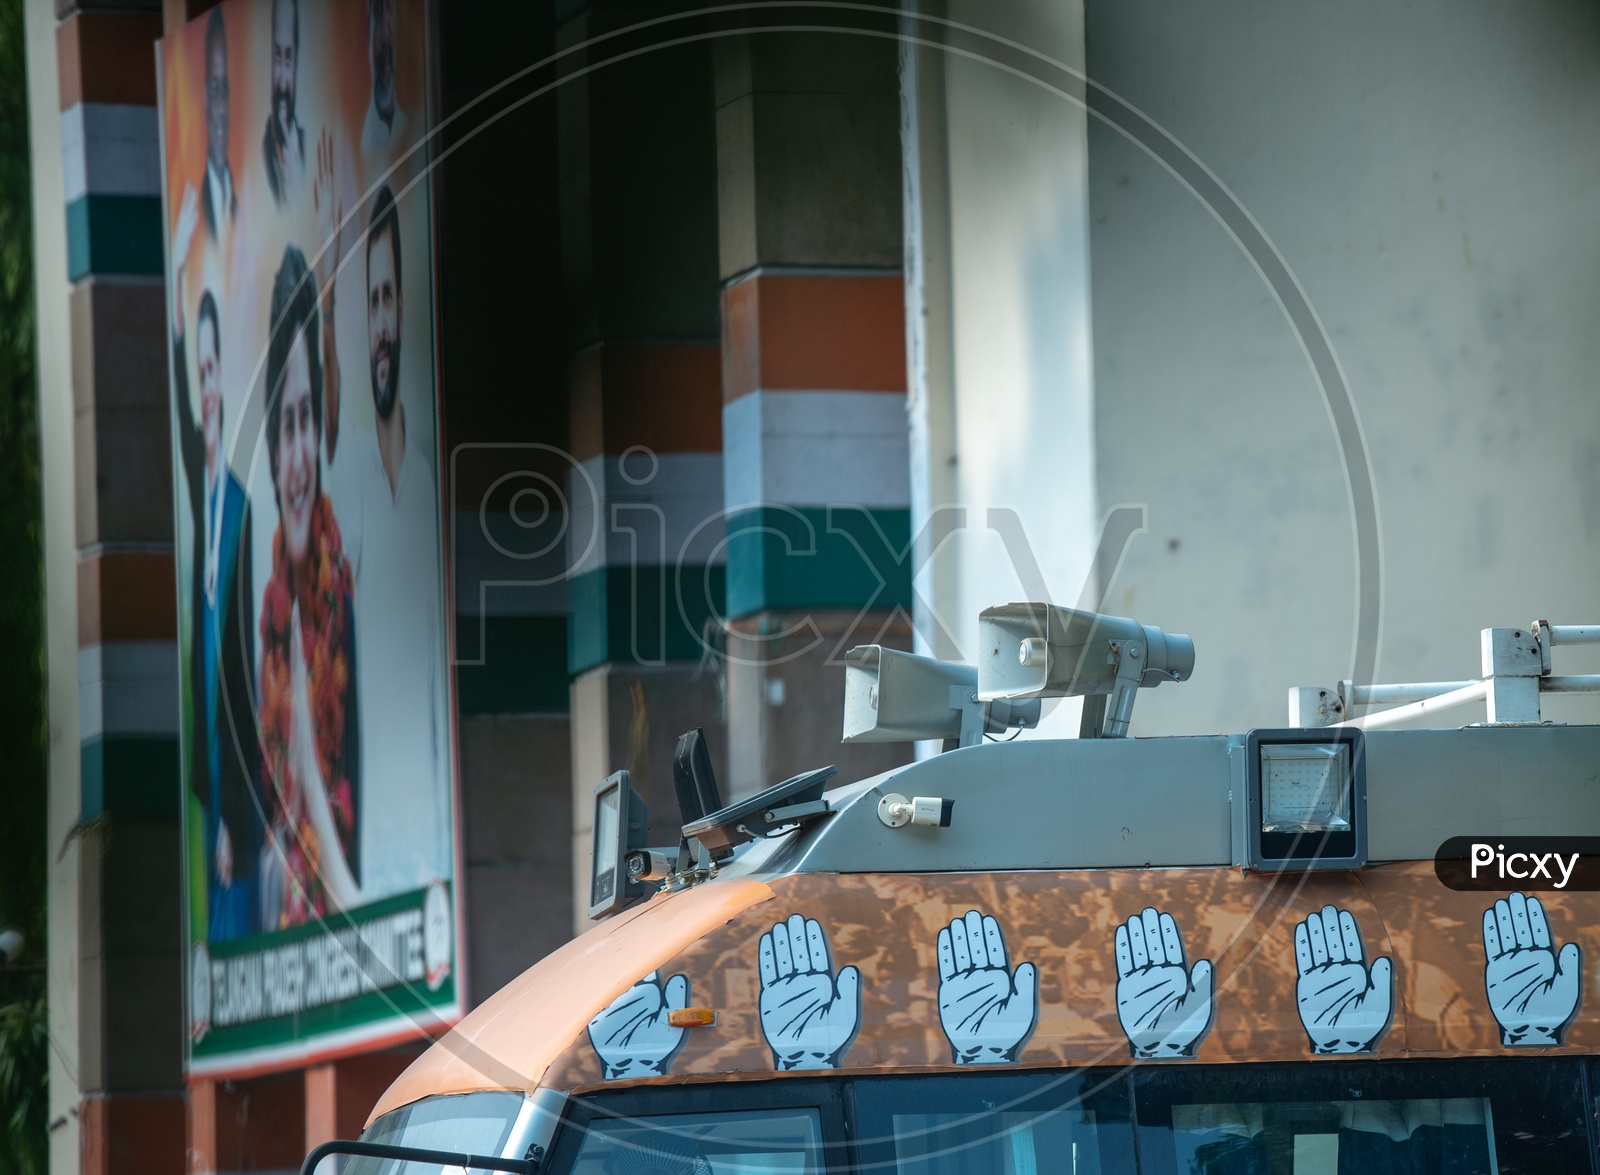 Congress  Party  Symbols  On The Party Campaign Vehicles At Gandhi Bhavan Congress Party  Office